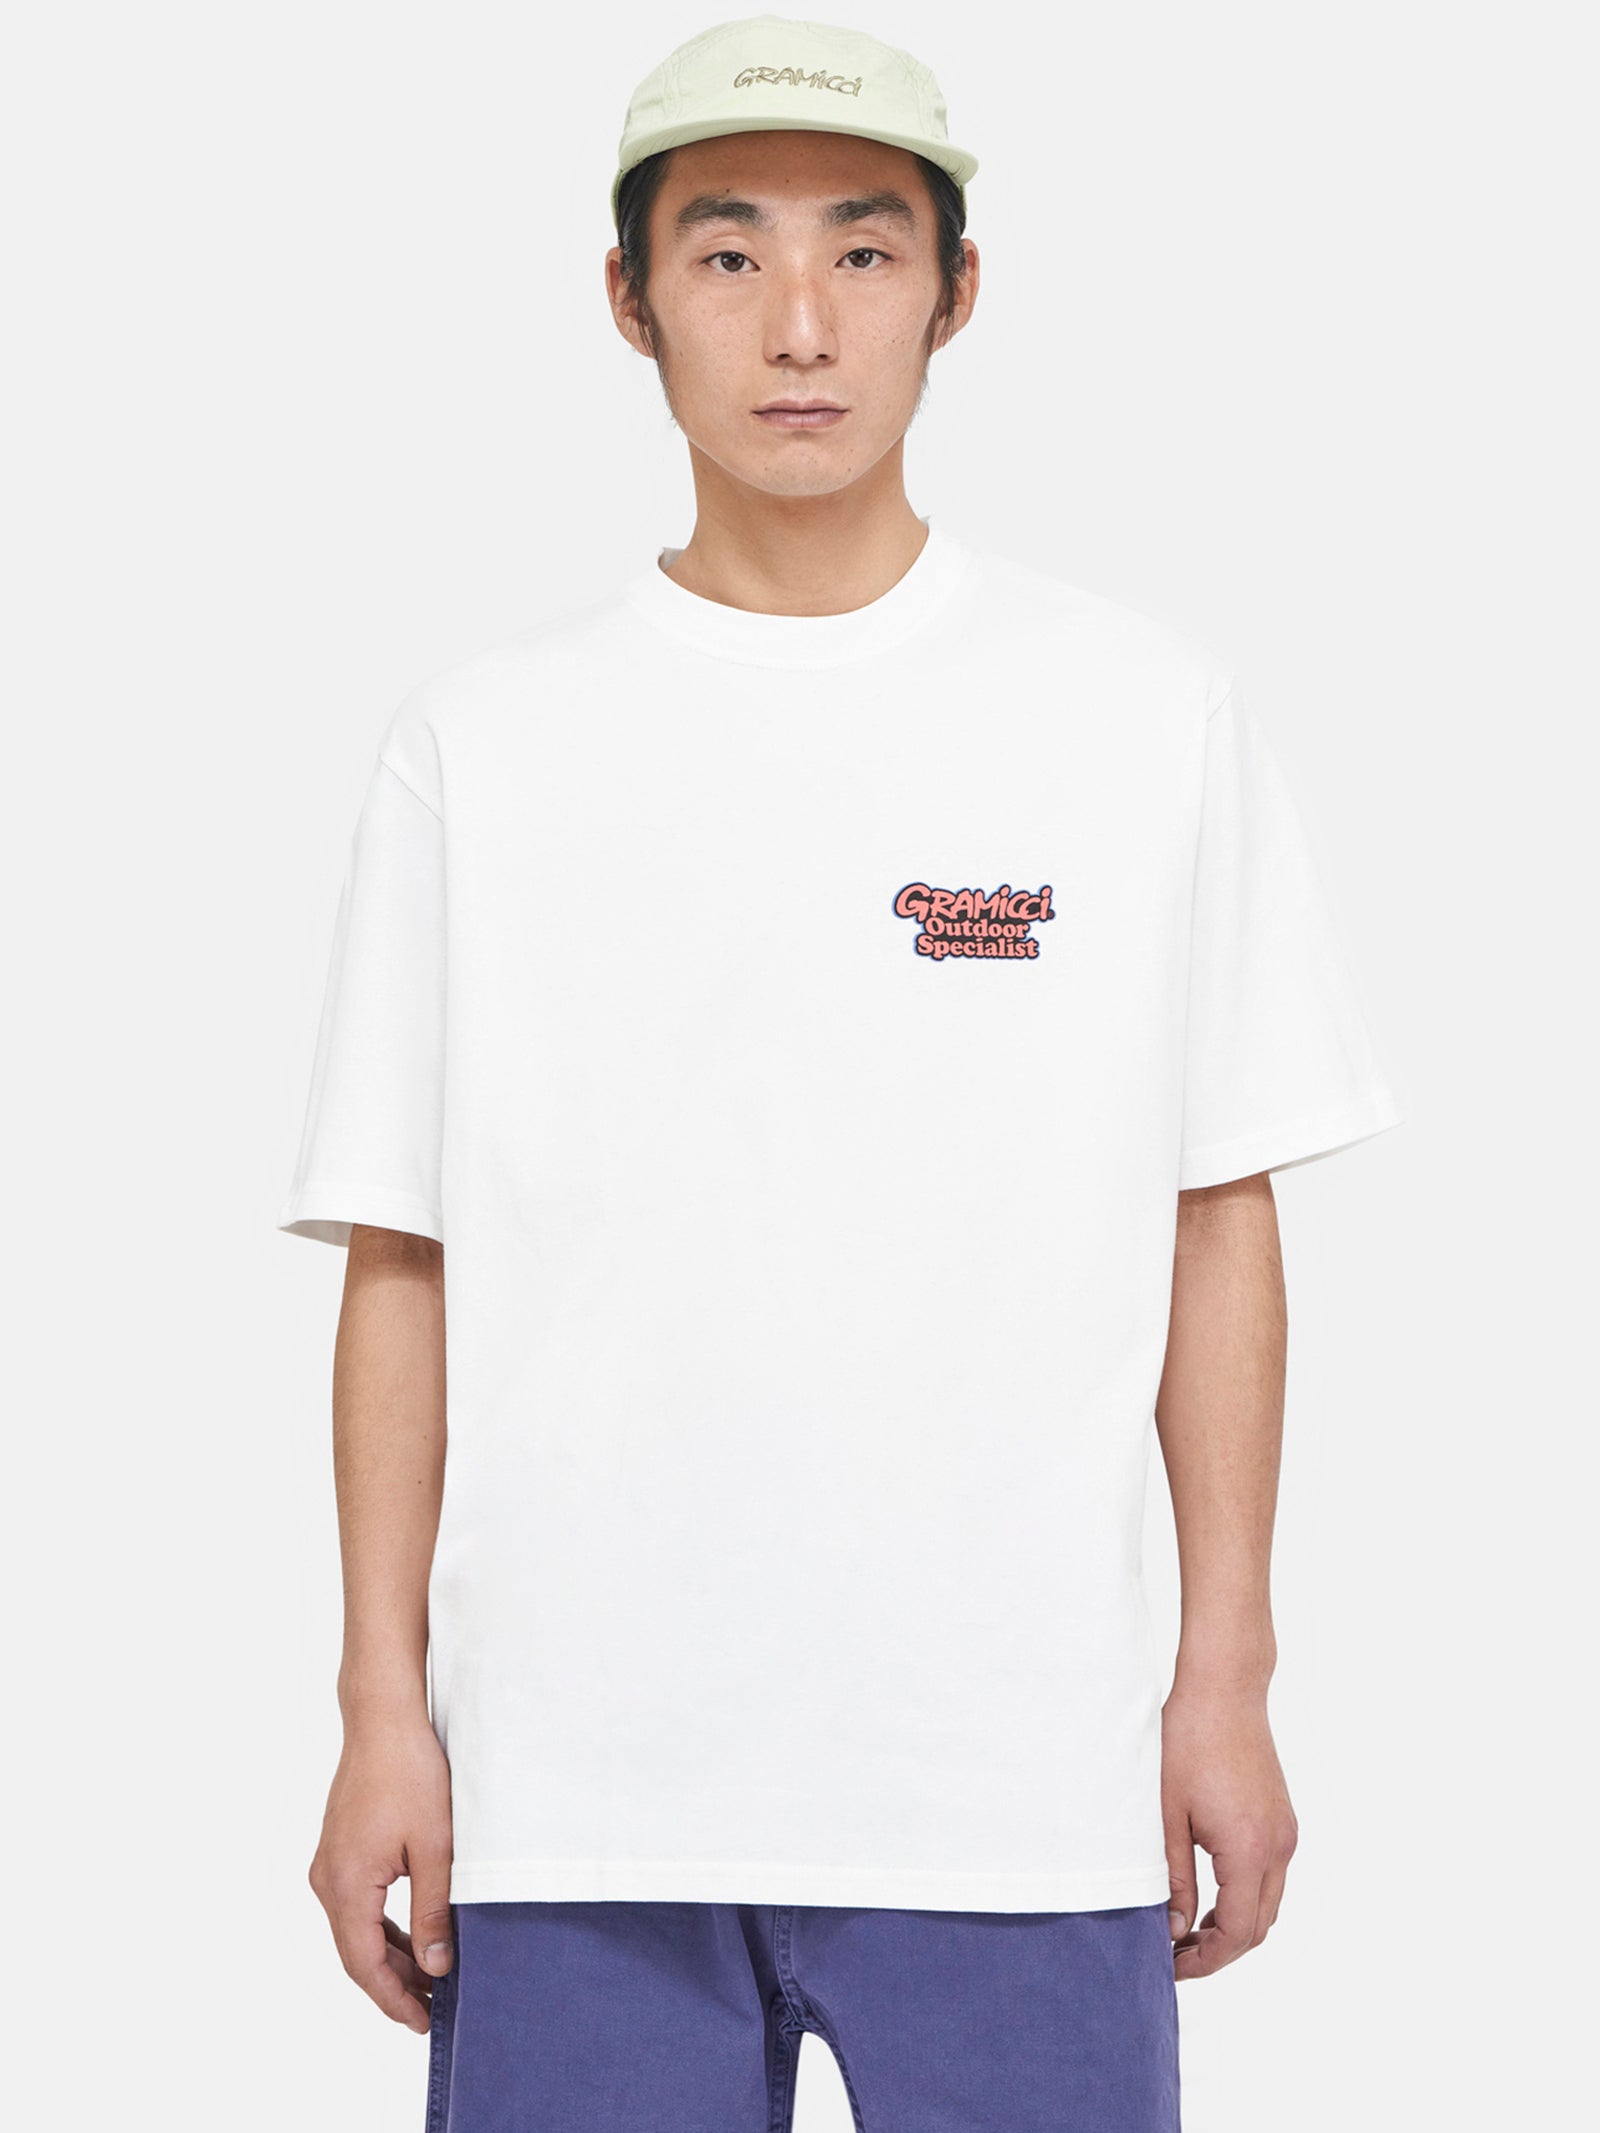 Outdoor Specialist T-Shirt in White